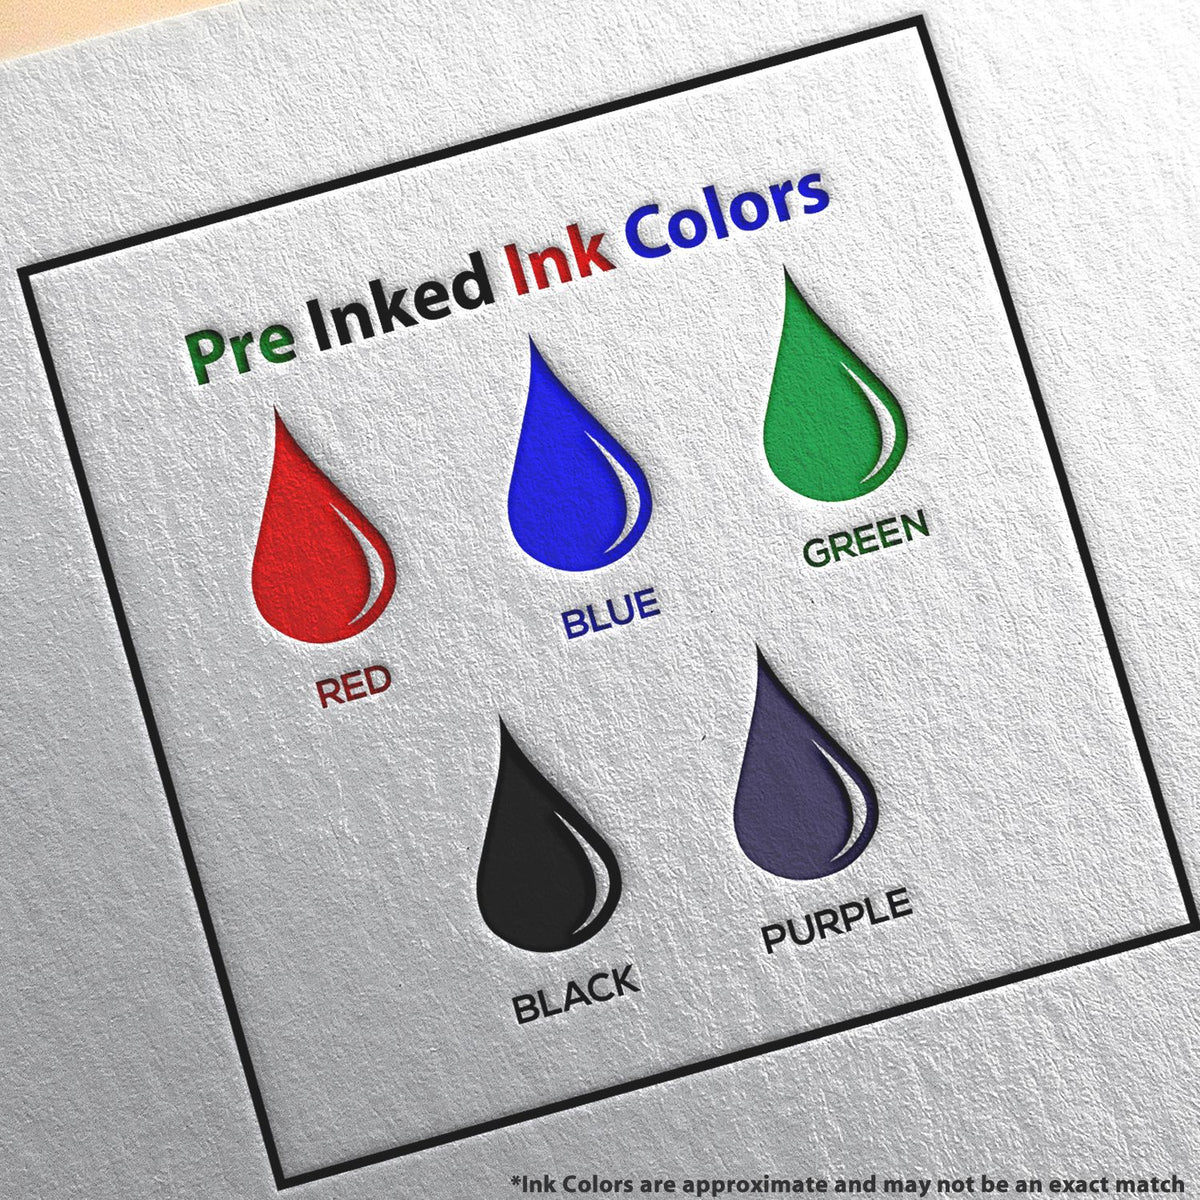 A picture showing the different ink colors or hues available for the Slim Pre-Inked New York Land Surveyor Seal Stamp product.